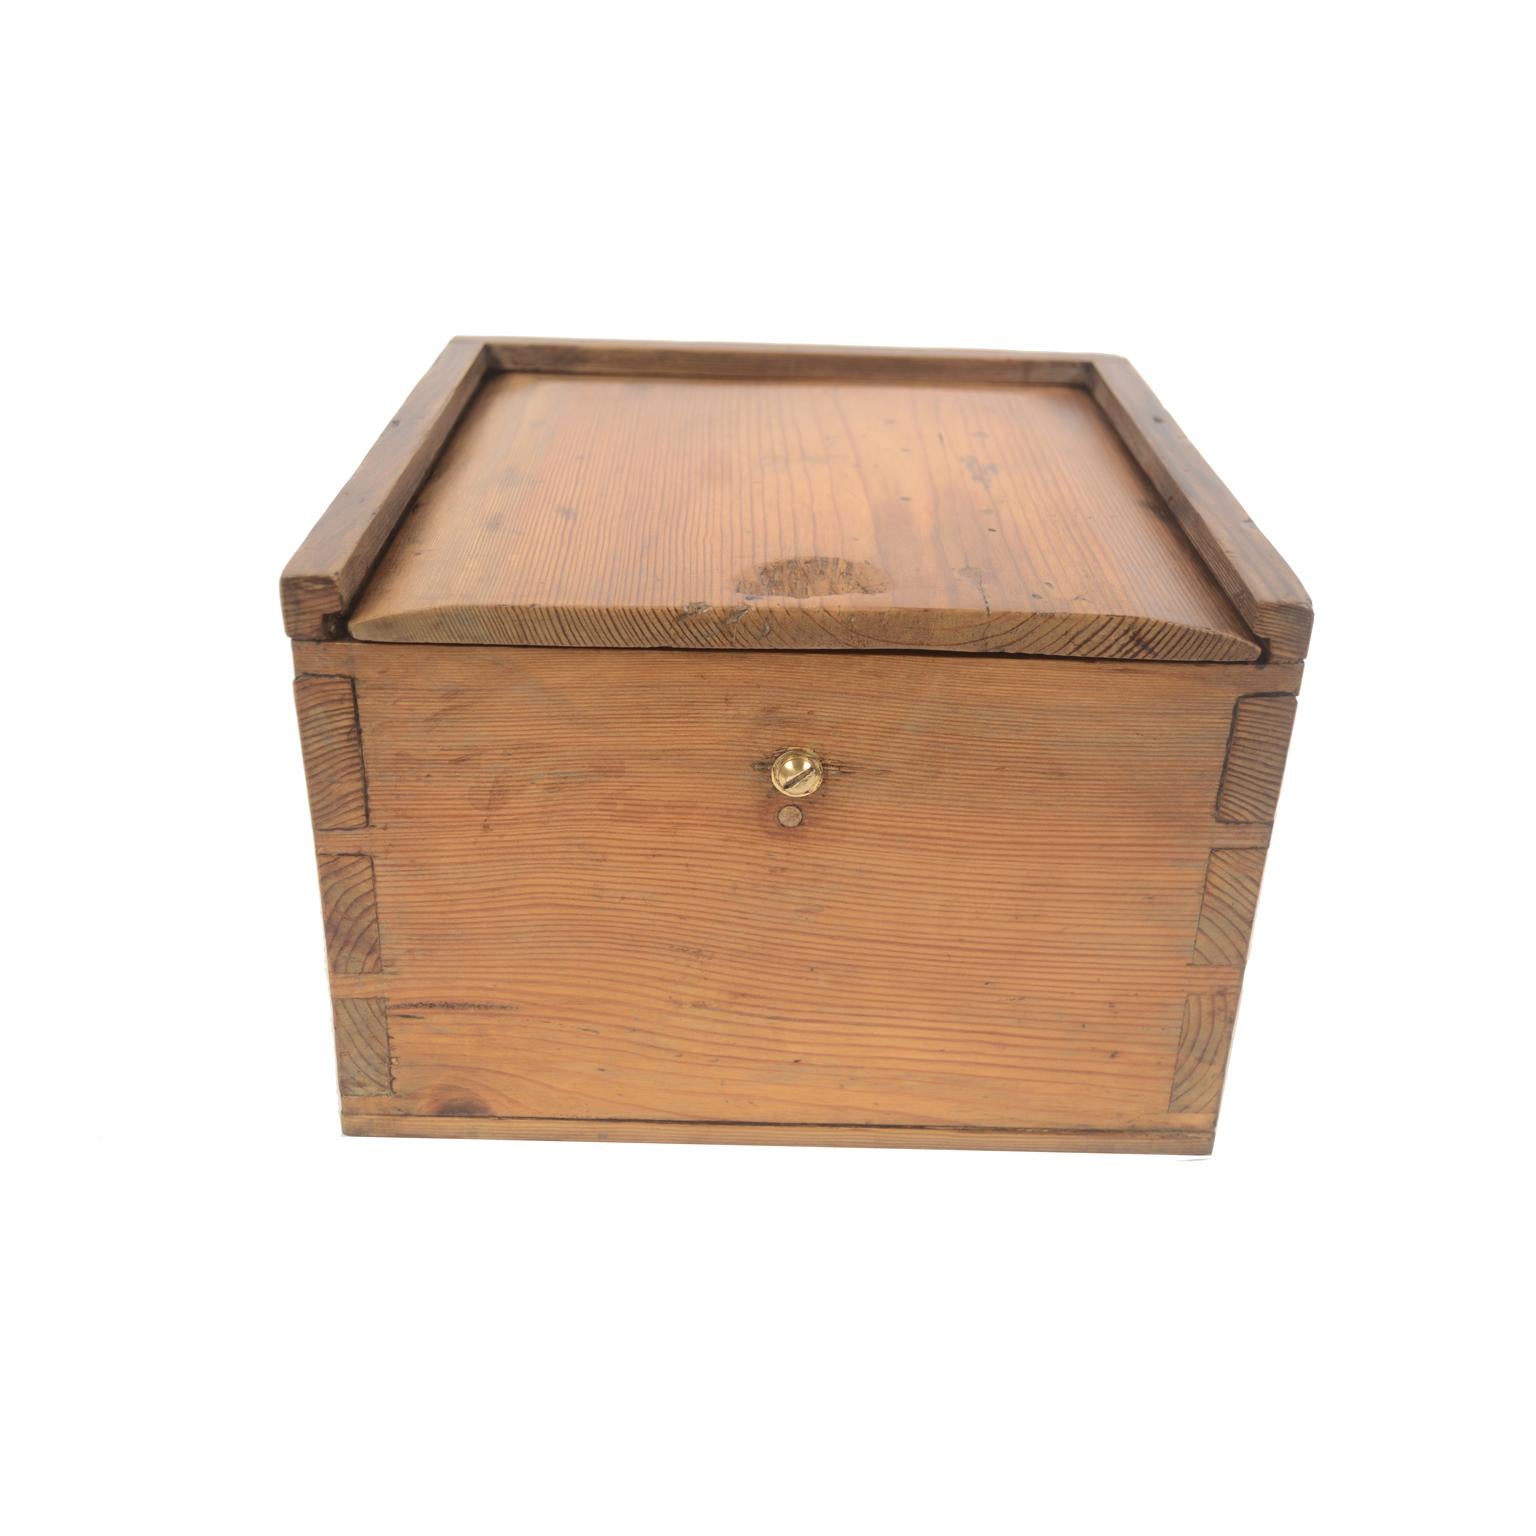 1860 German Magnetic Nautical Compass in Its Original Wooden Box with Slot Lid 4